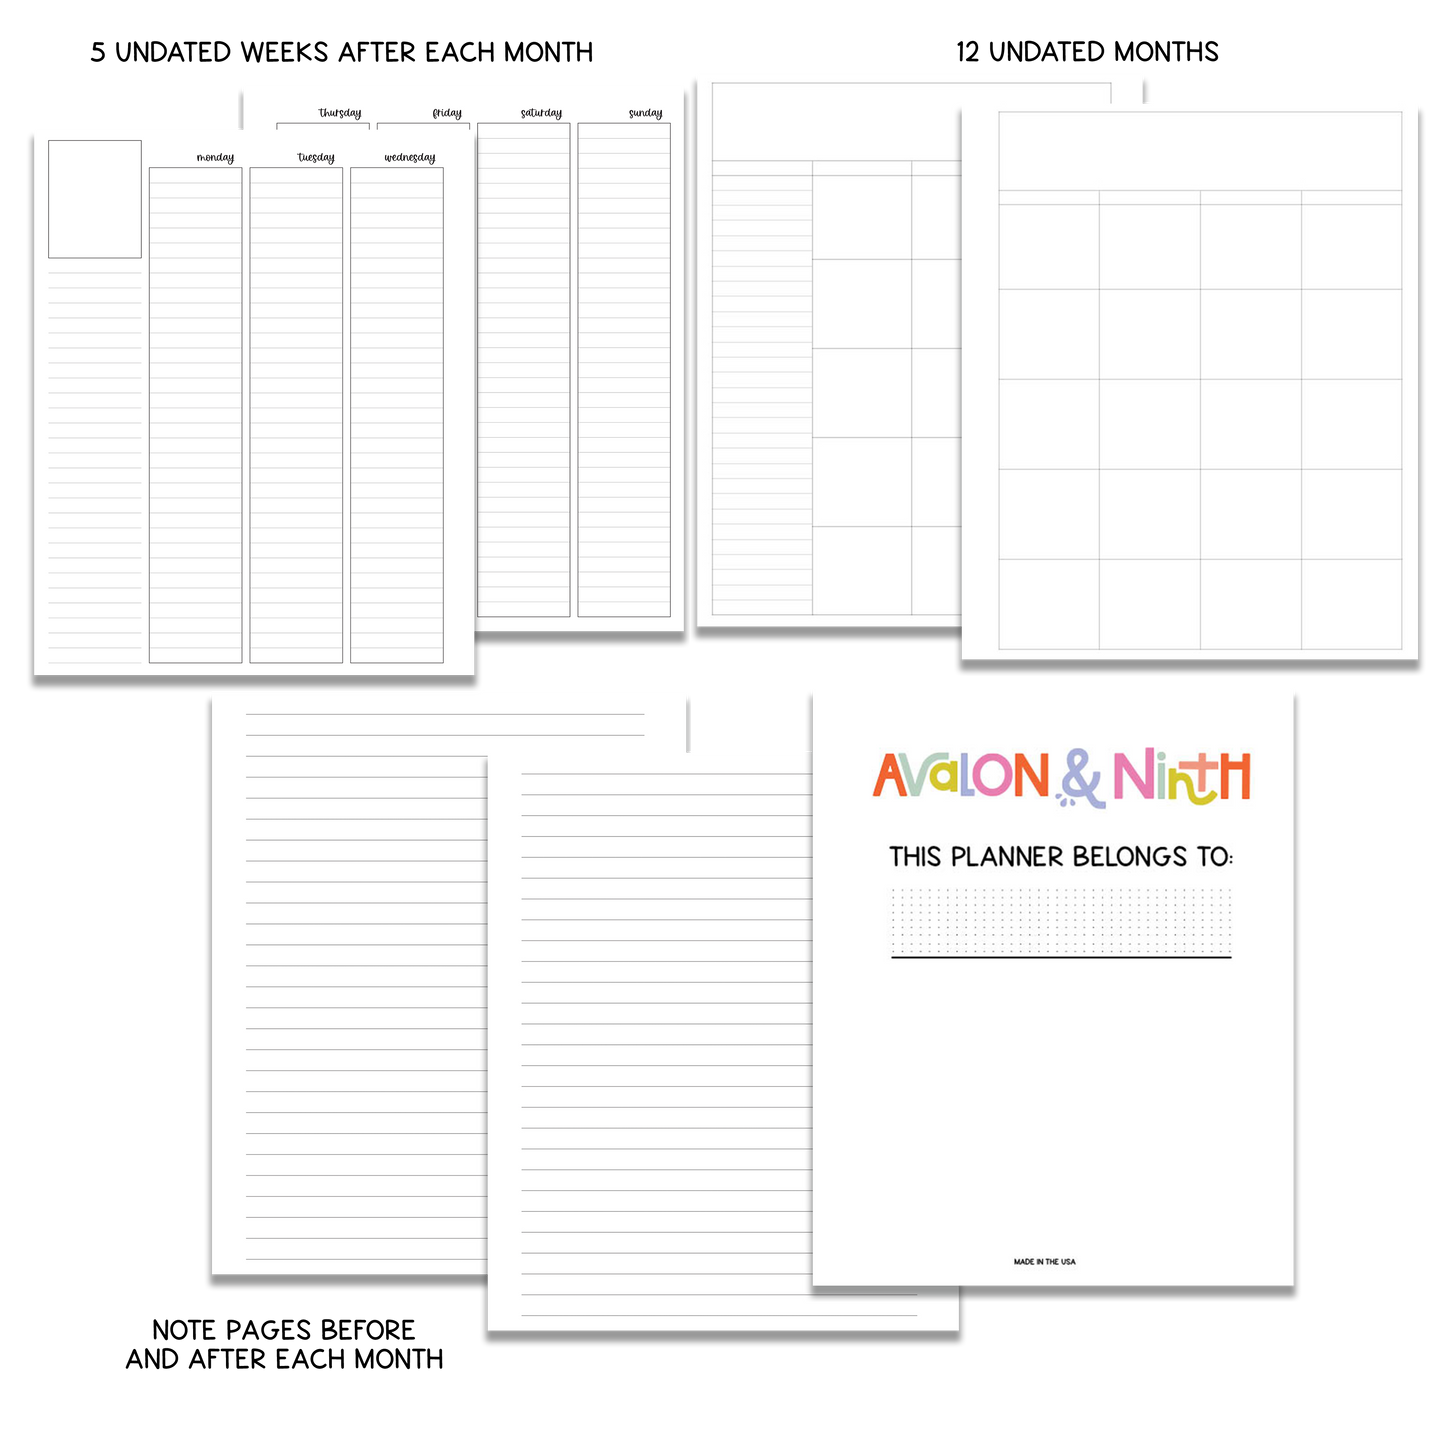 7x9 Planner Inserts // Vertical Weekly // Choose Tabs or No Tabs